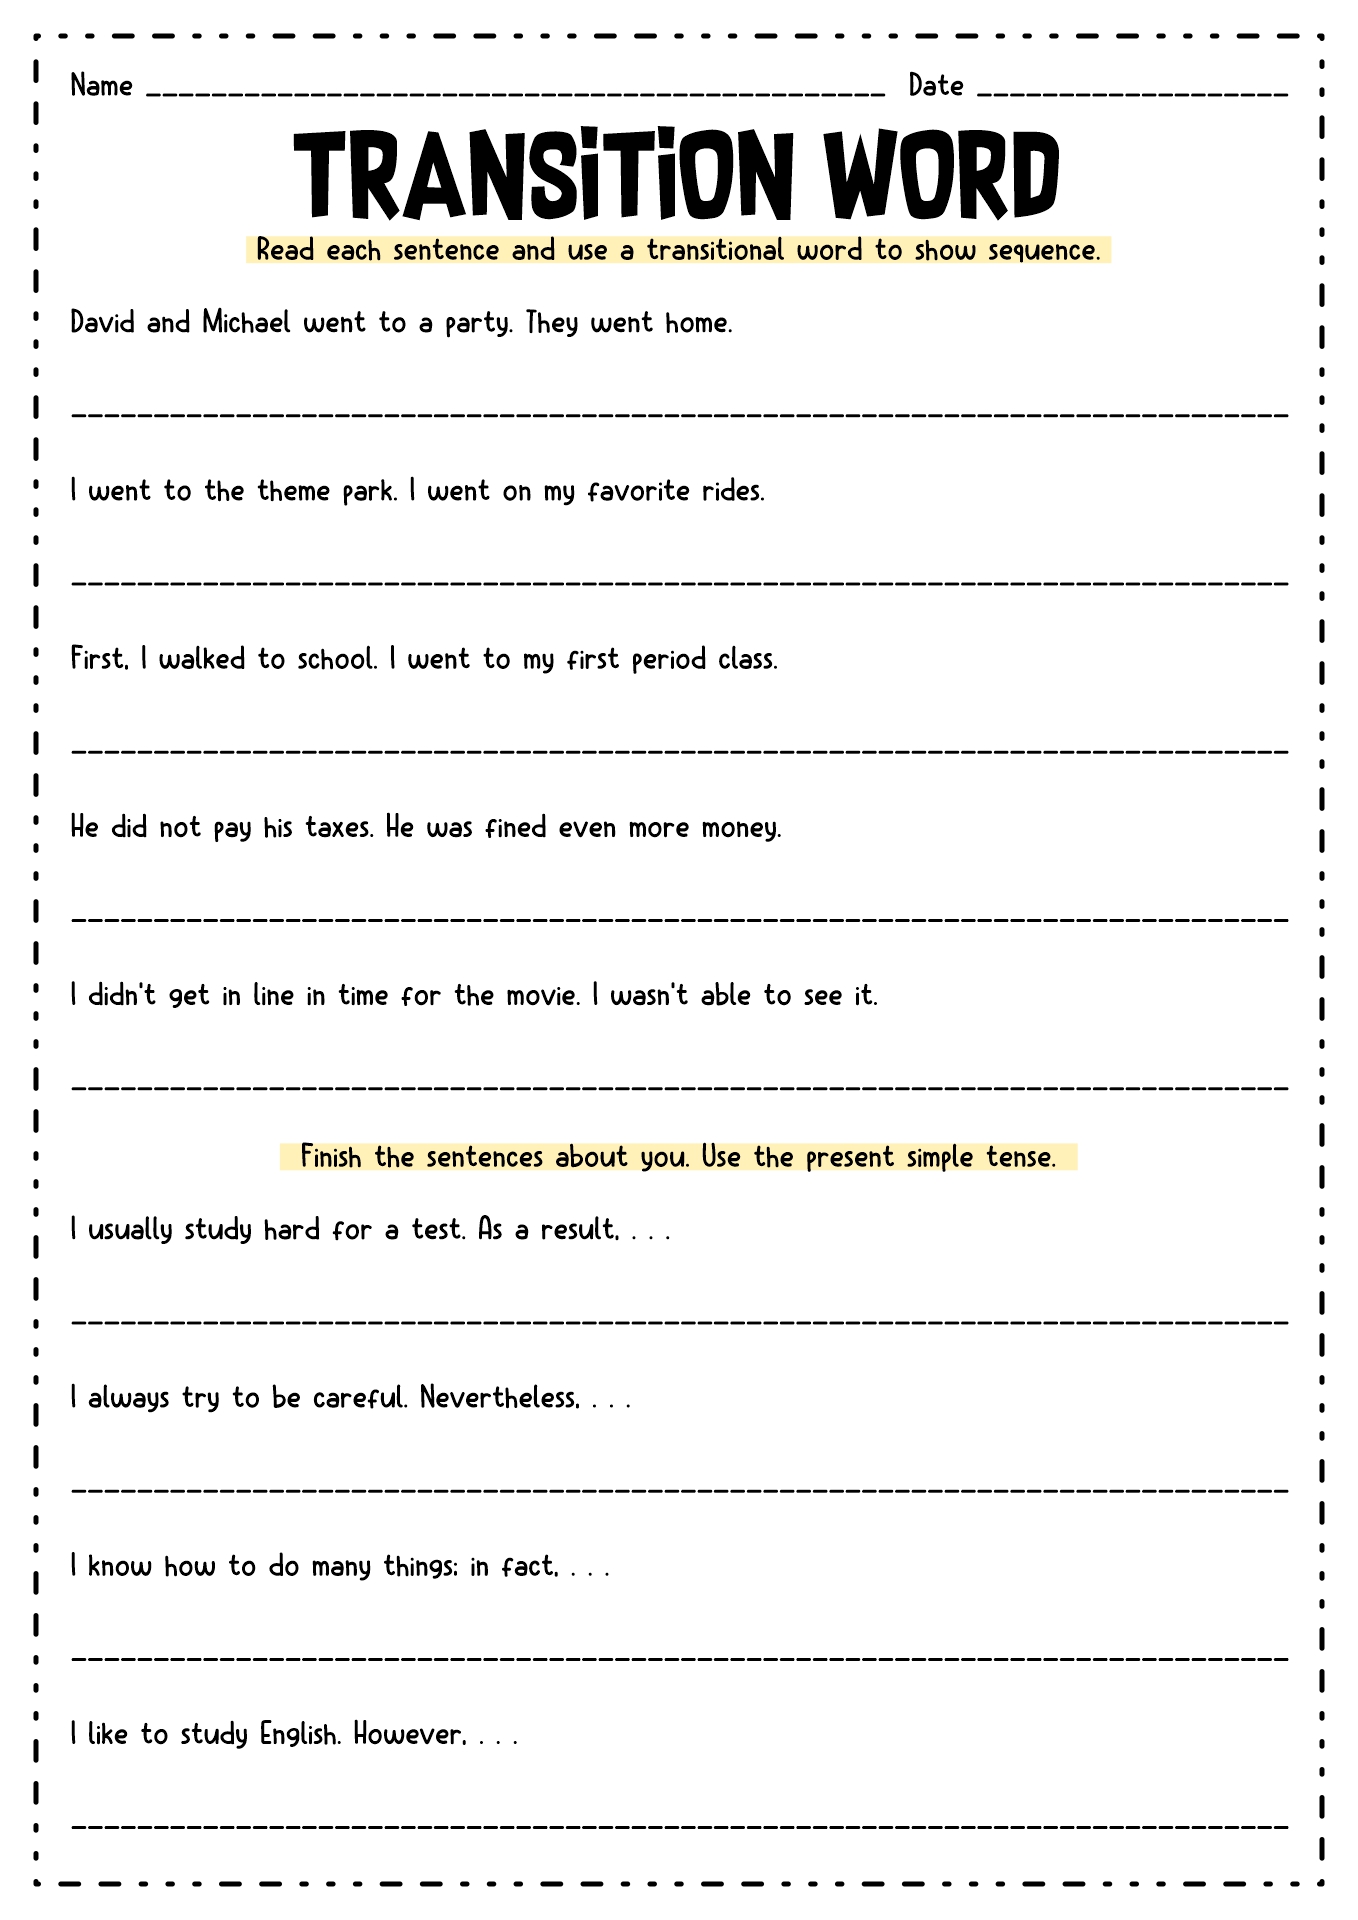 transitional-words-and-phrases-esl-worksheet-by-gracie88